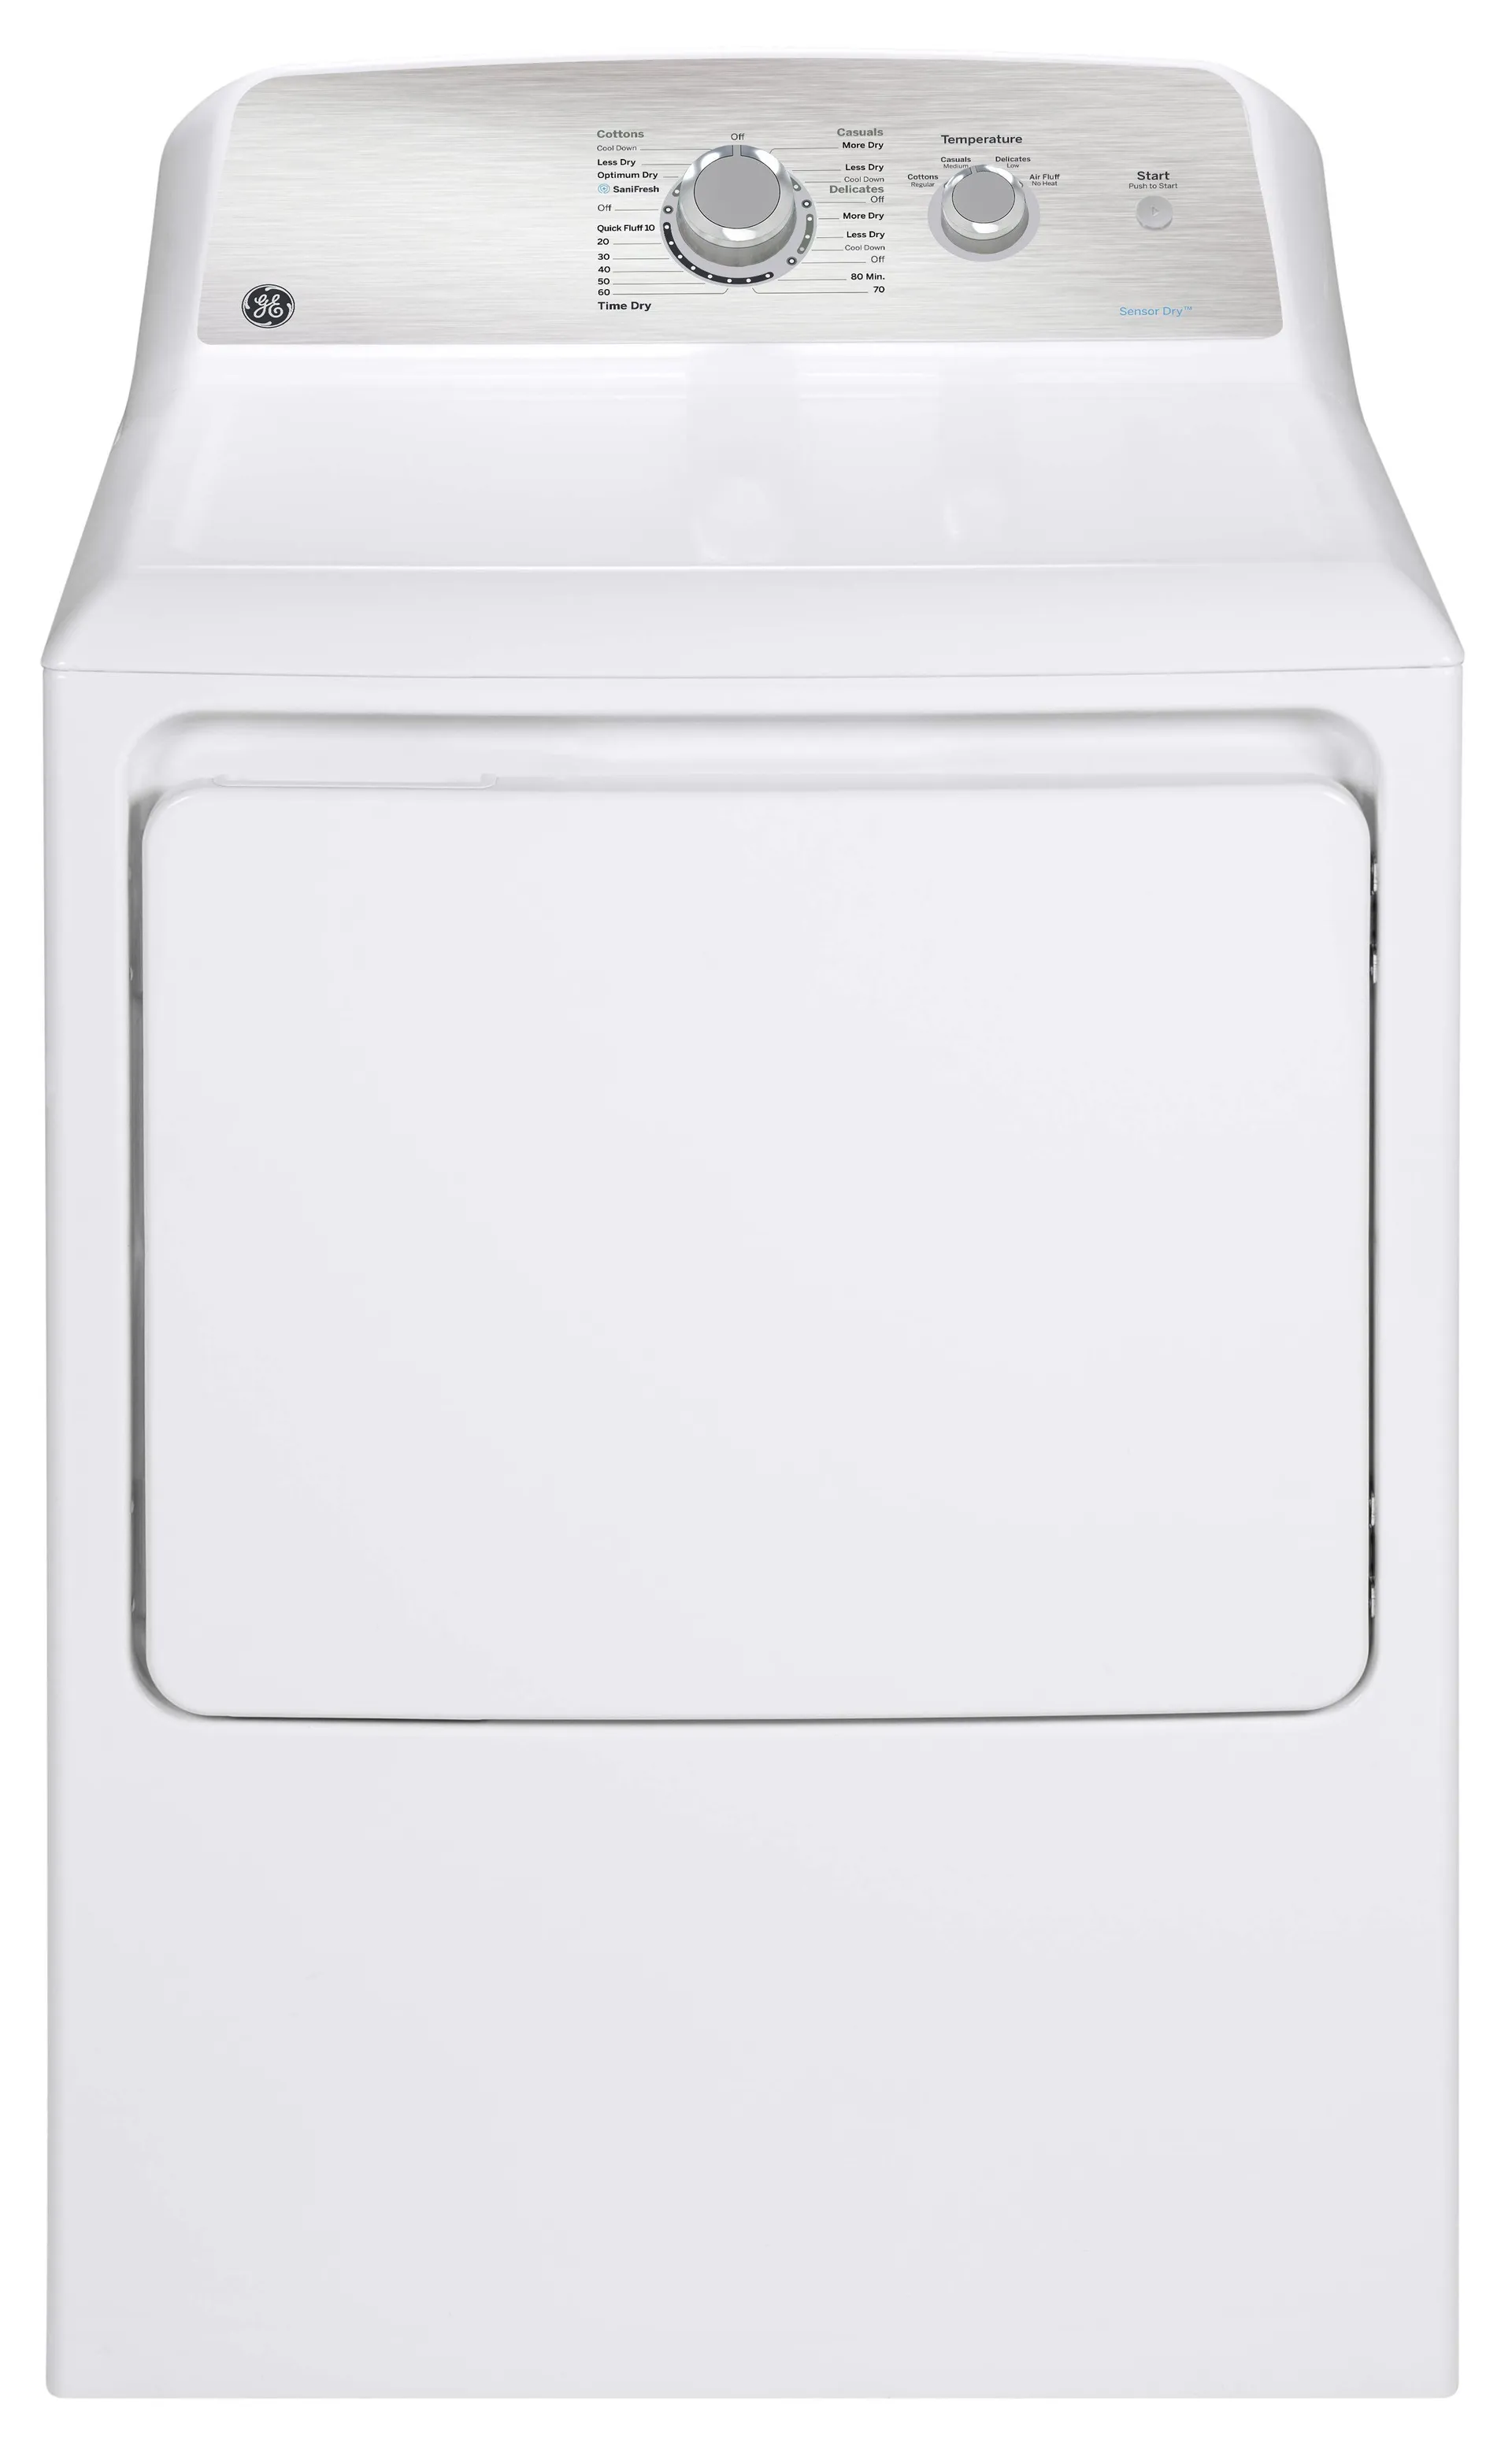 GE White Electric Dryer with SaniFresh cycle (7.2 Cu. Ft.) - GTD40EBMRWS